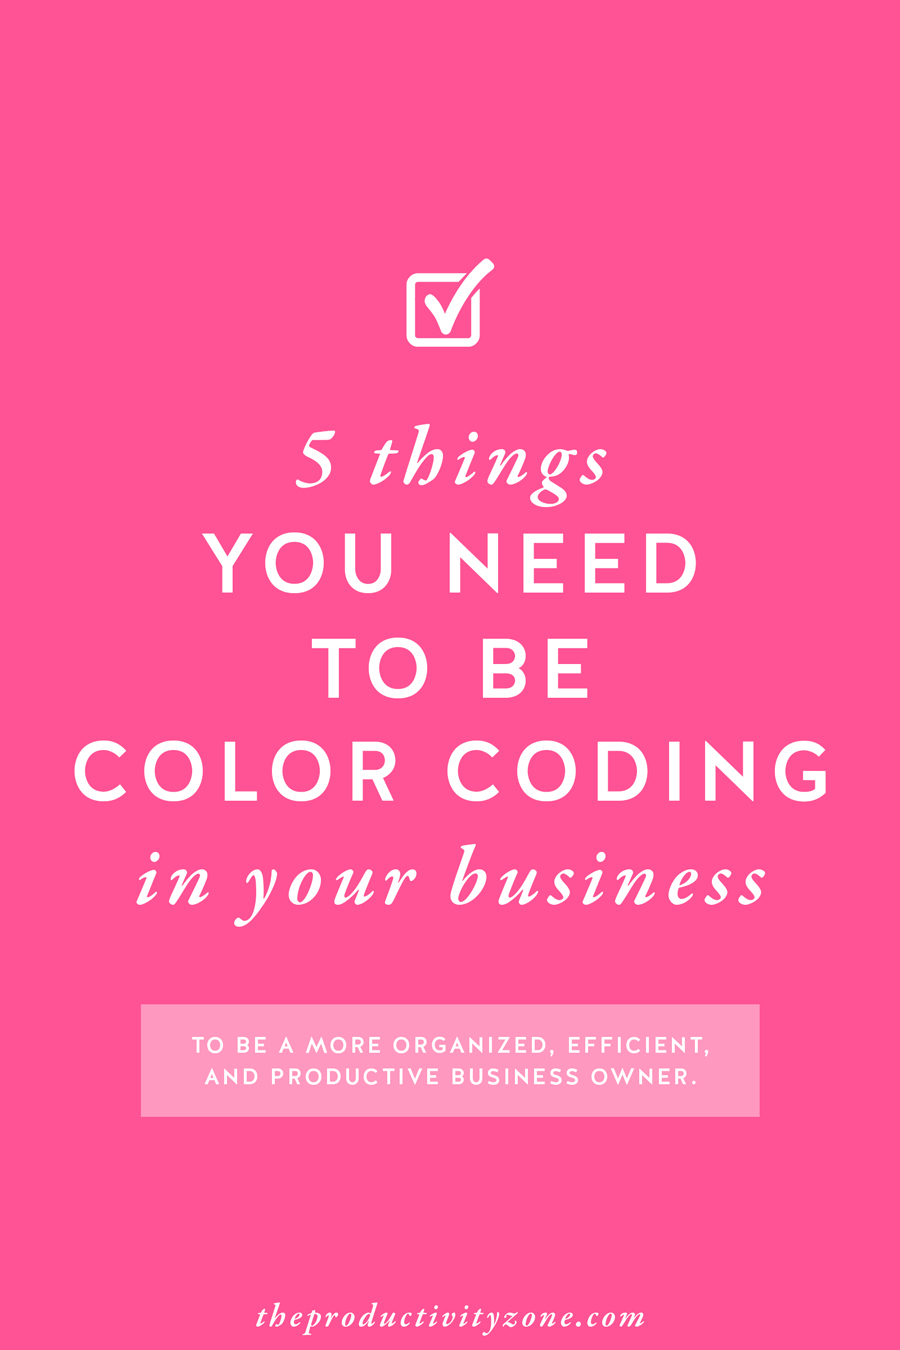 Color coding will help you be a more organized, efficient, and productive business owner. Over on The Productivity Zone, I’m sharing what 5 things you need to be color coding in your business to make your life EASIER!!